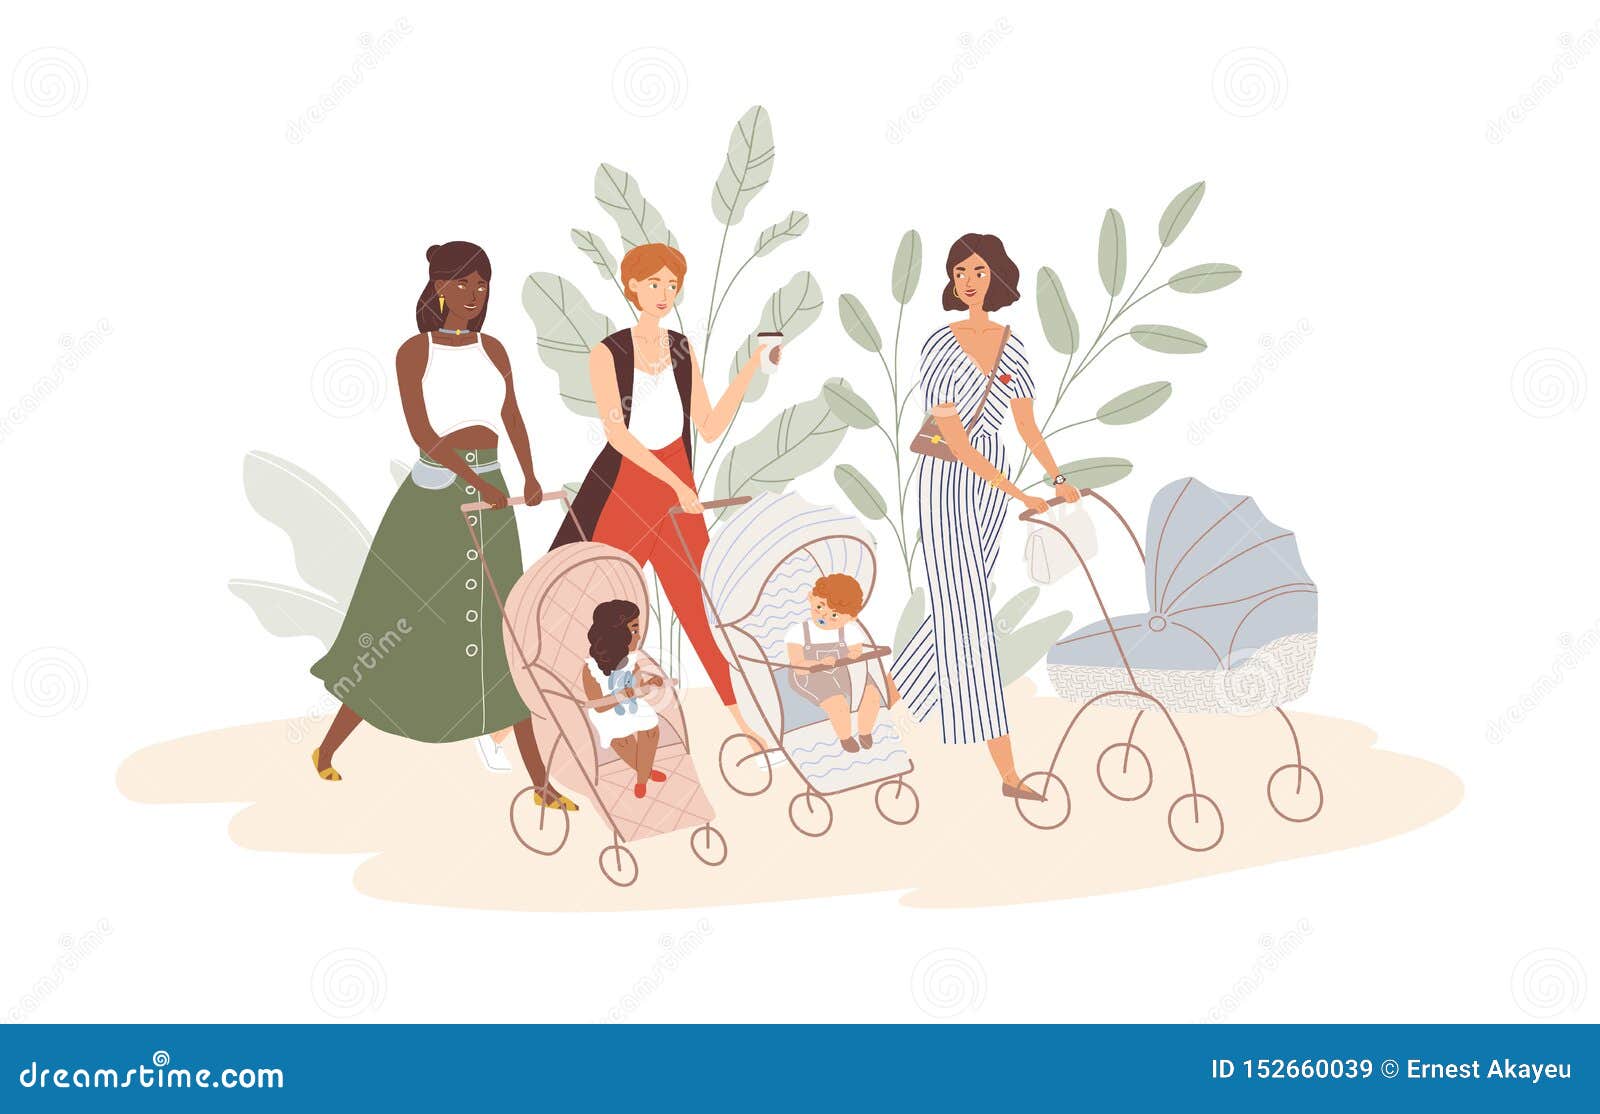 group of cute women with babies in prams and strollers. moms walking with their infant children. community of young